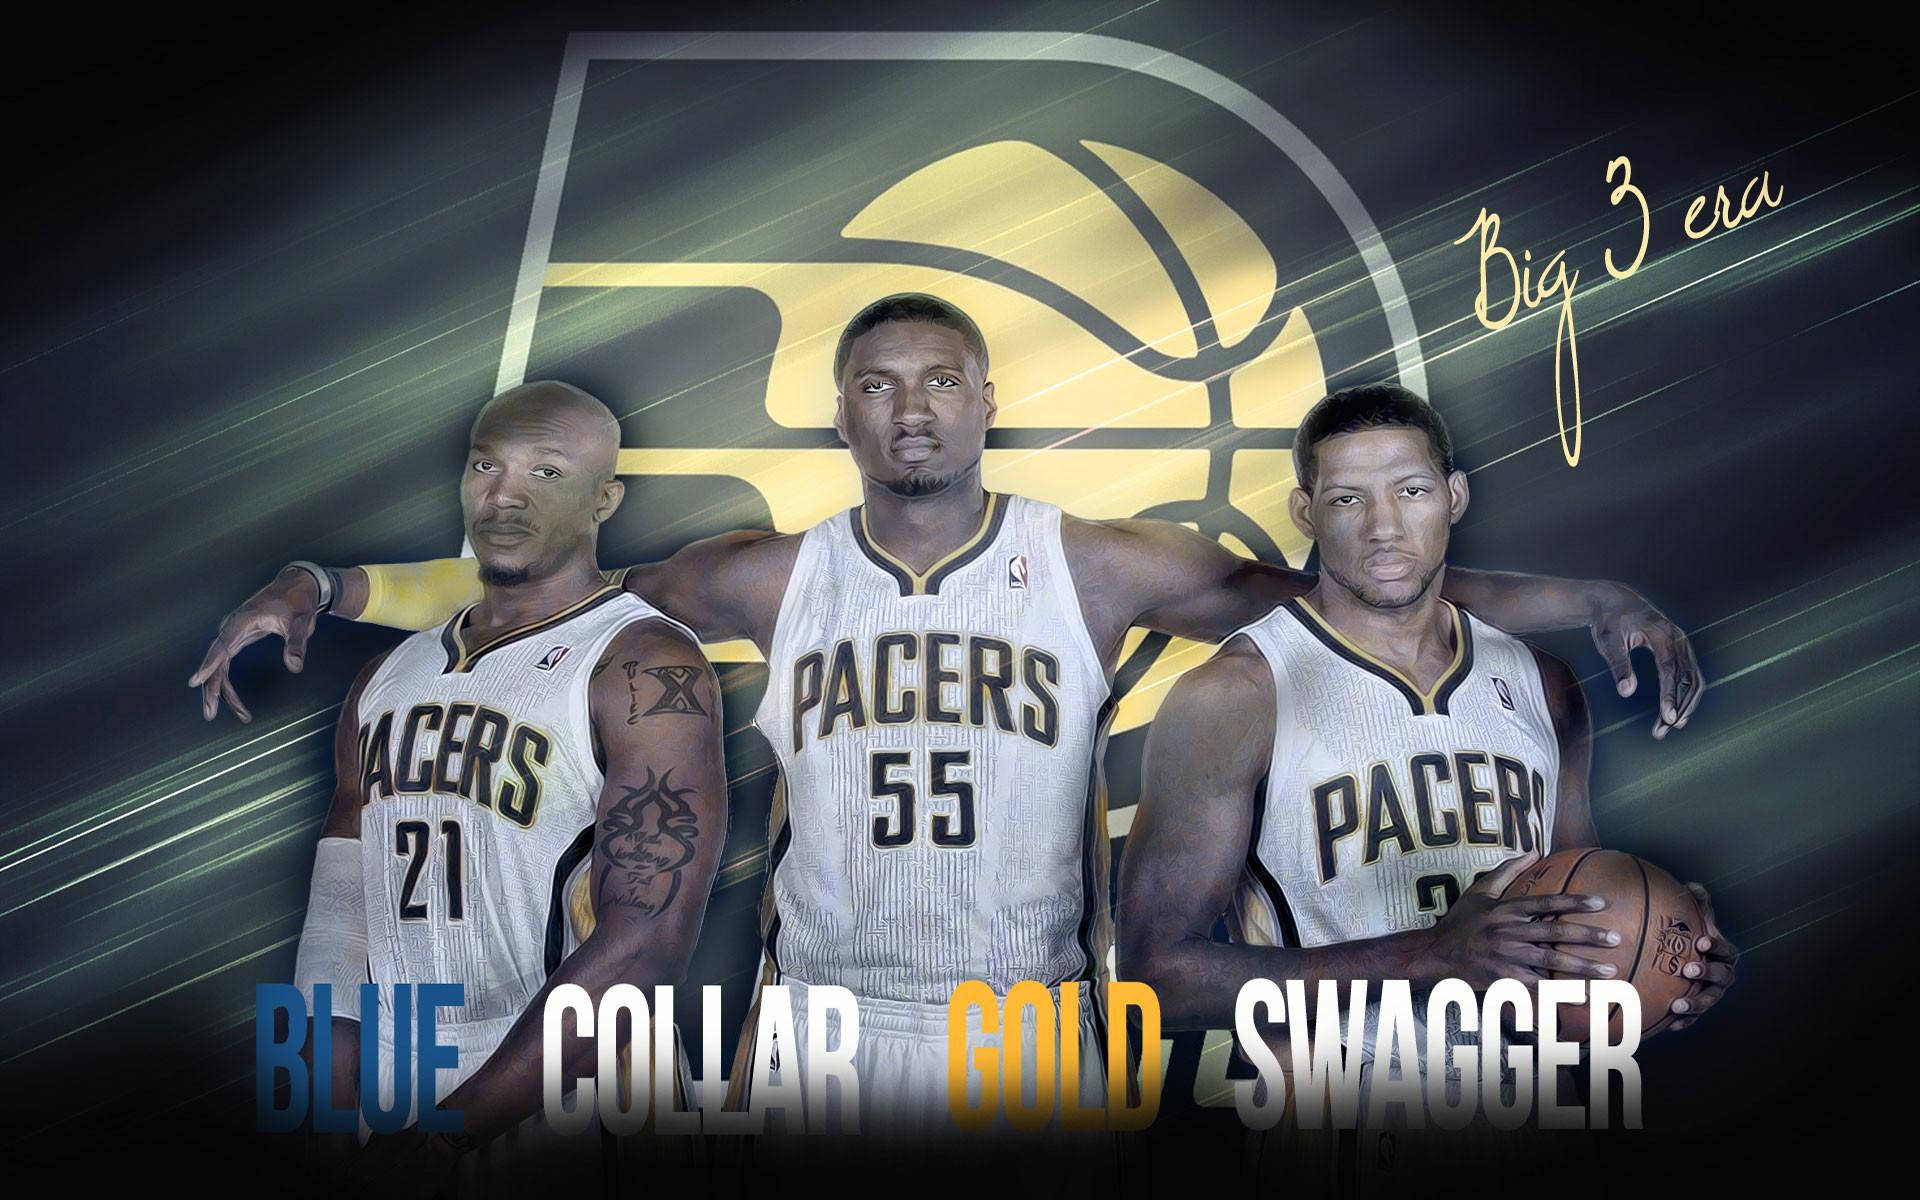 Indiana Blue Collar Gold Swagger Wallpaper